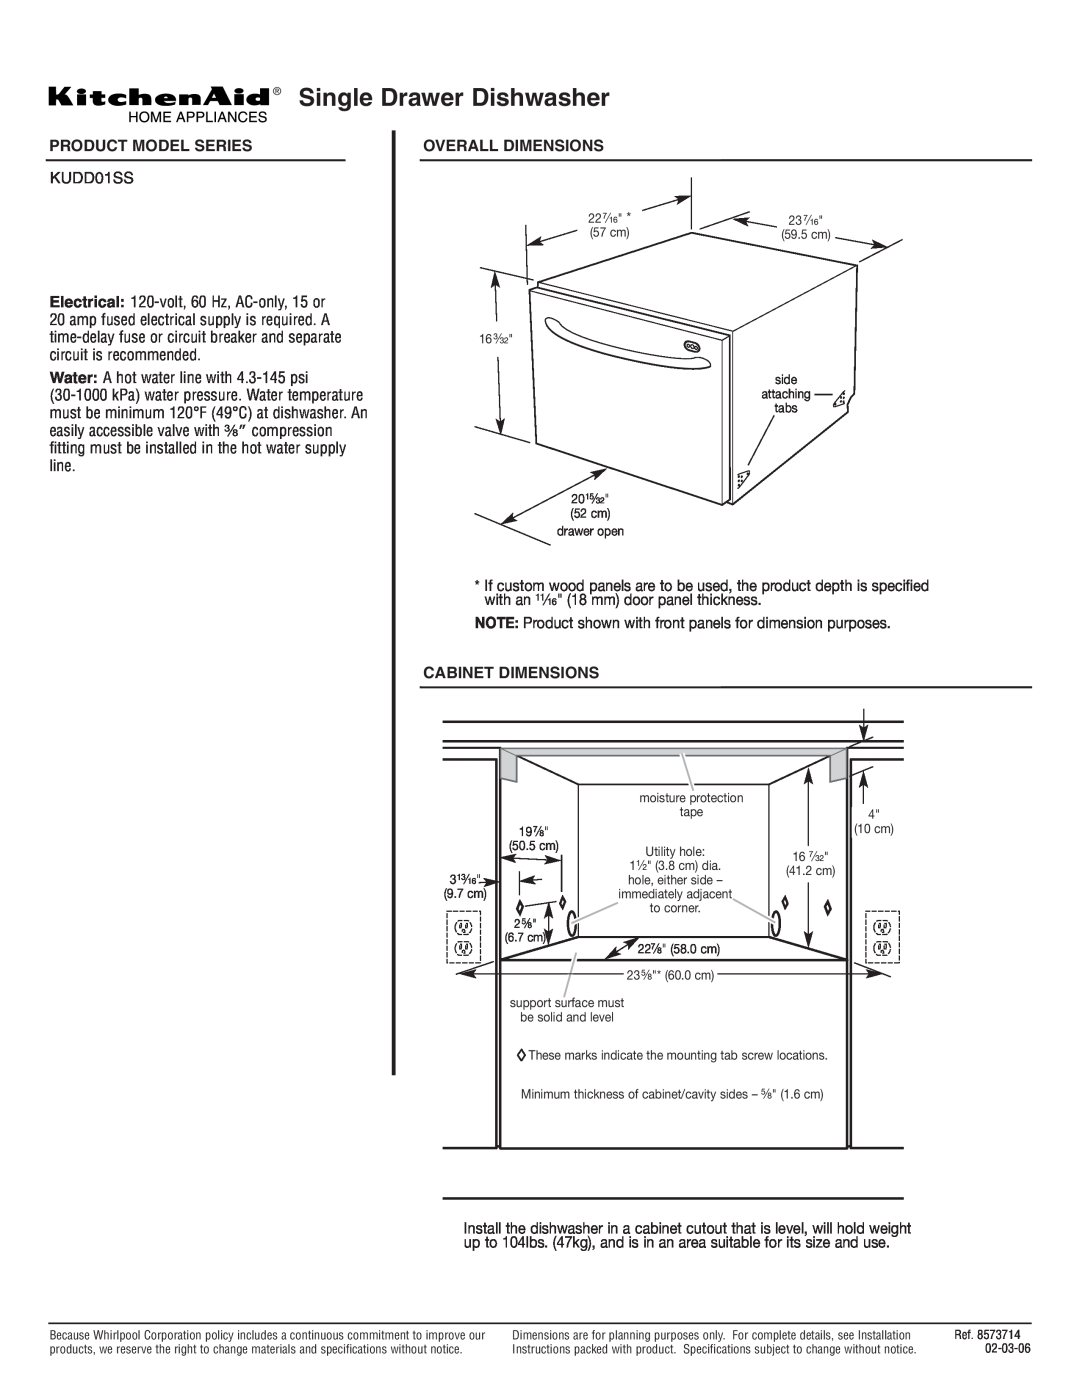 KitchenAid KUDD01SS dimensions Single Drawer Dishwasher, Product Model Series, Overall Dimensions, Cabinet Dimensions 